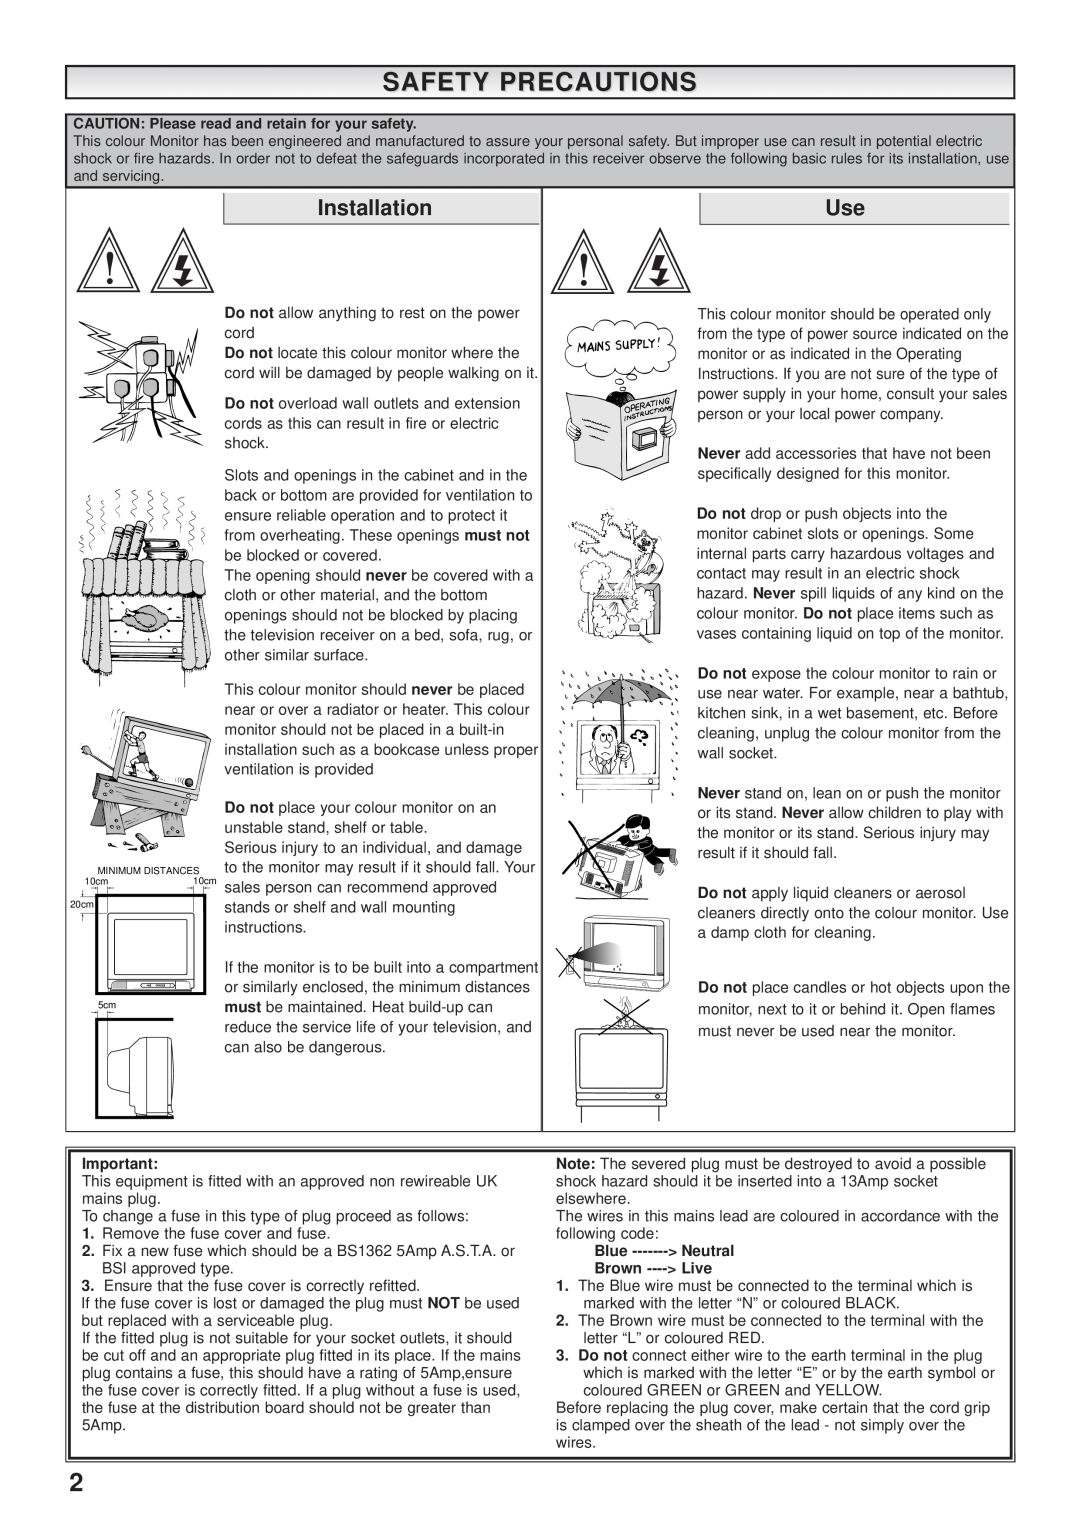 Sanyo VMC-7321P Safety Precautions, Installation, CAUTION Please read and retain for your safety, Blue ------- Neutral 